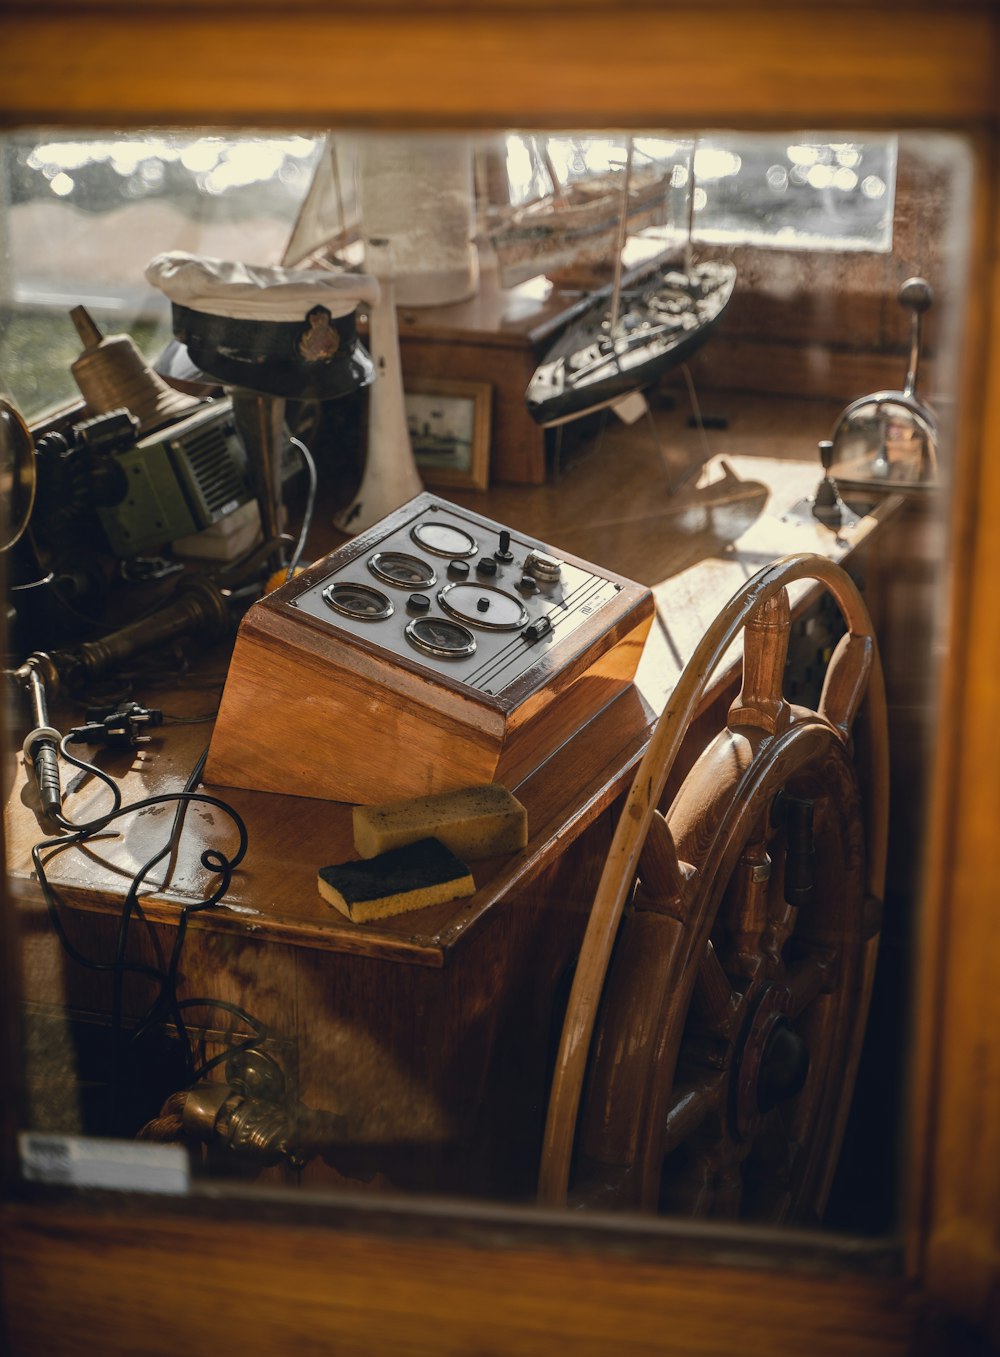 a boat's steering wheel and other items are seen through a window